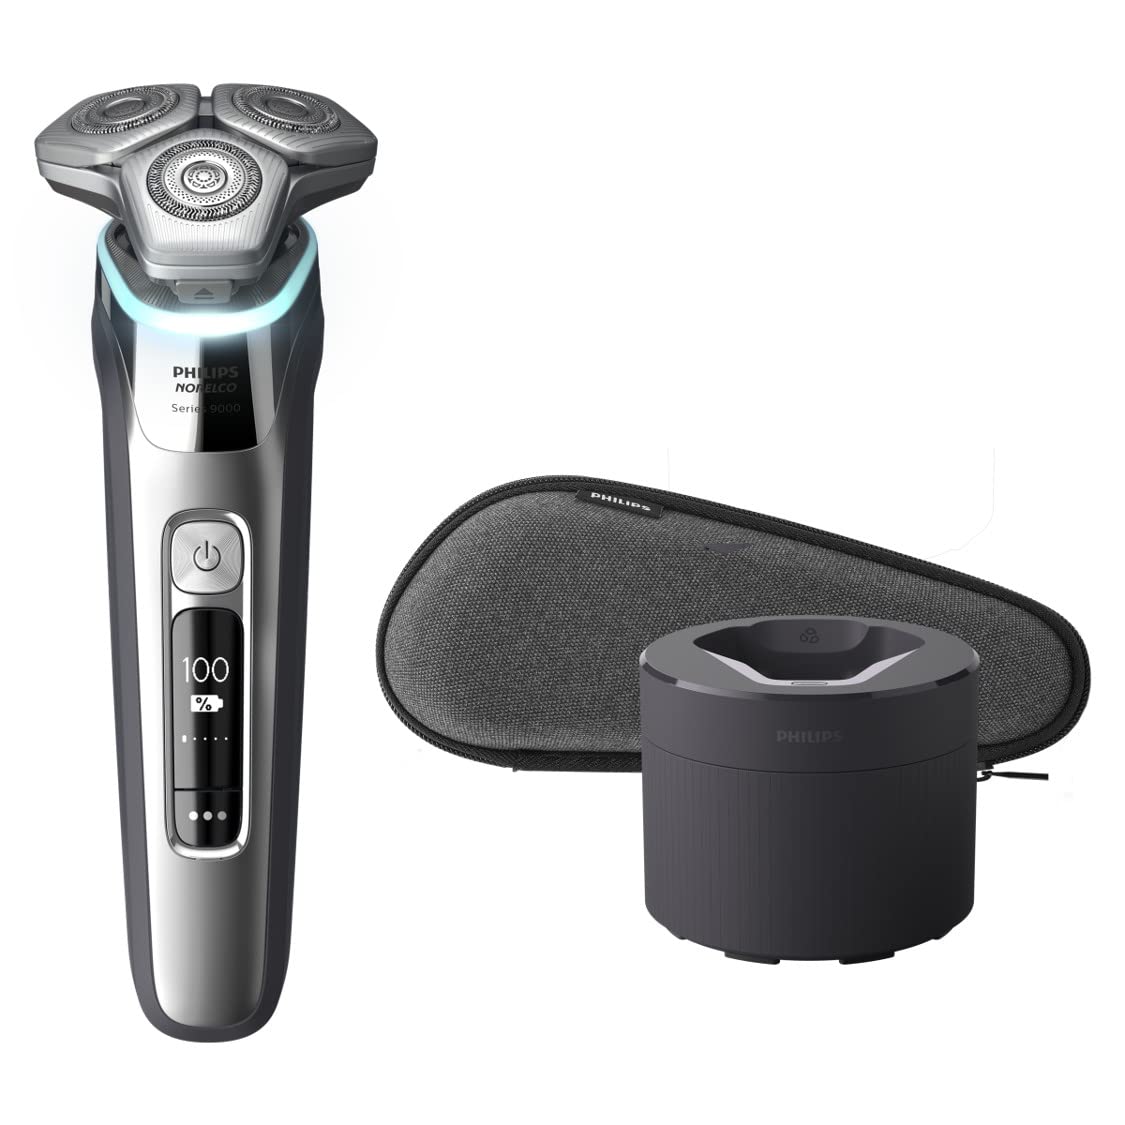 Philips Norelco 9500 Rechargeable Wet & Dry Electric Shaver with Quick Clean, Travel Case, Pop up Trimmer, S9985/84, Black New Shaver 9500, List Price is $229.96, Now Only $189.96